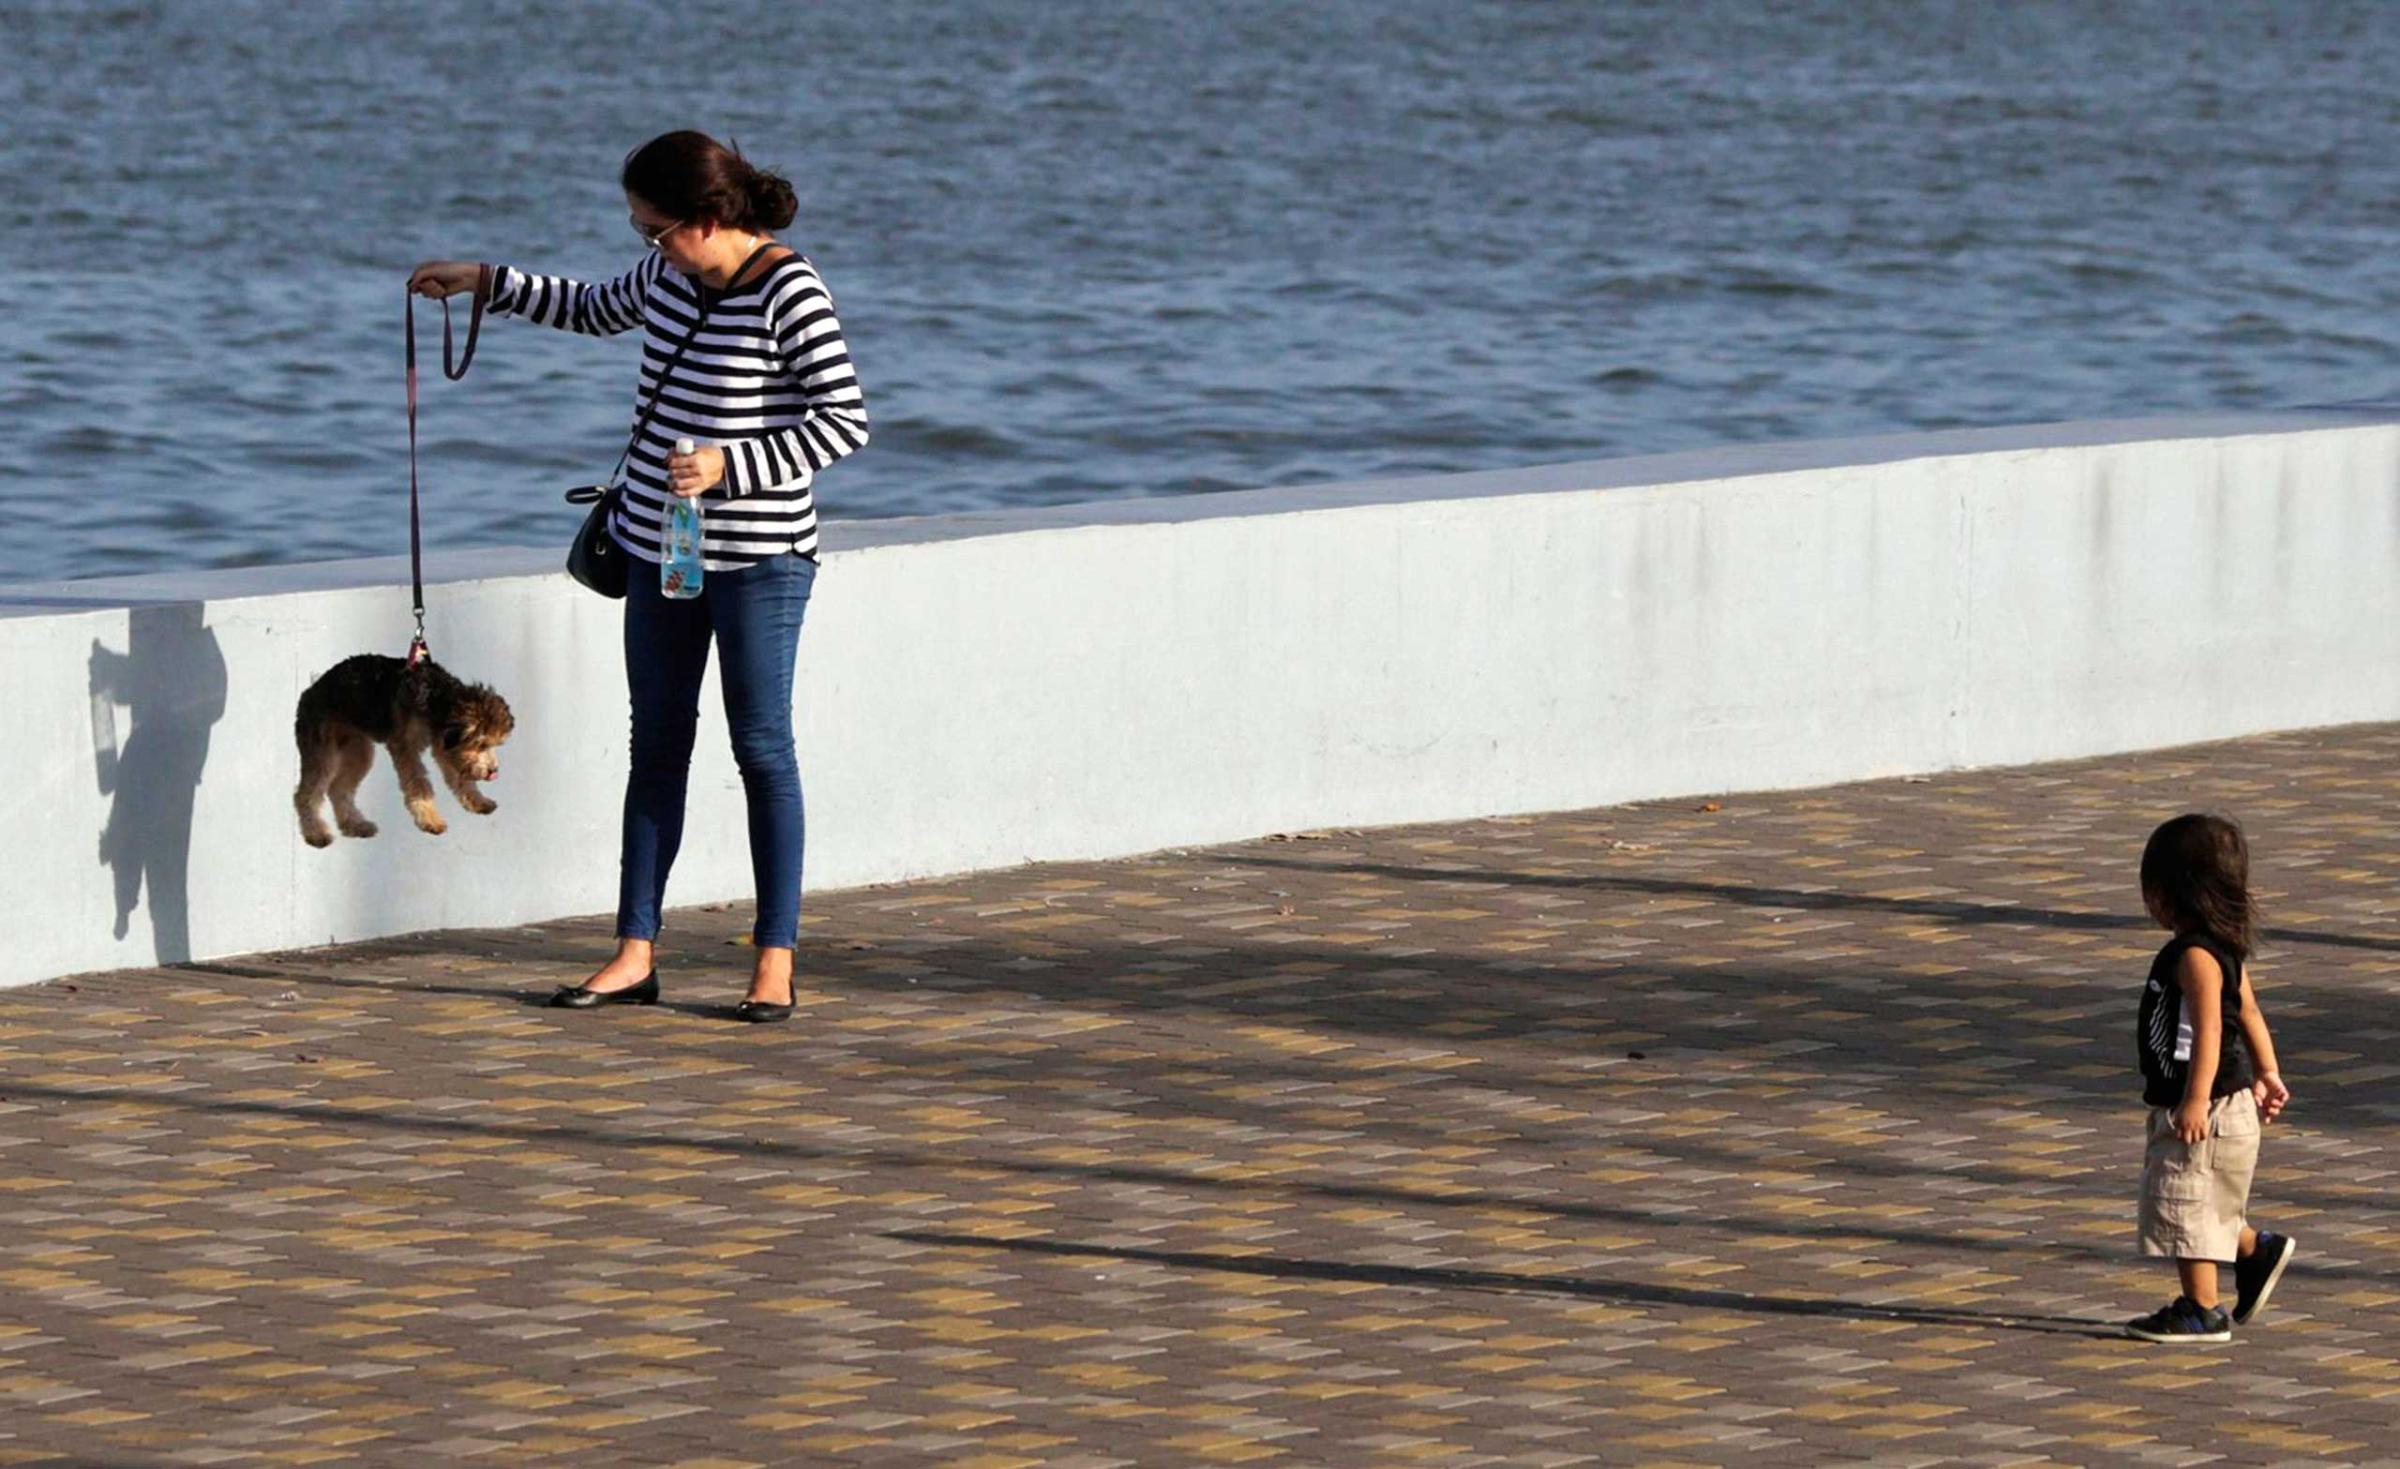 A woman lifts a dog on a leash along the seafront in Panama City